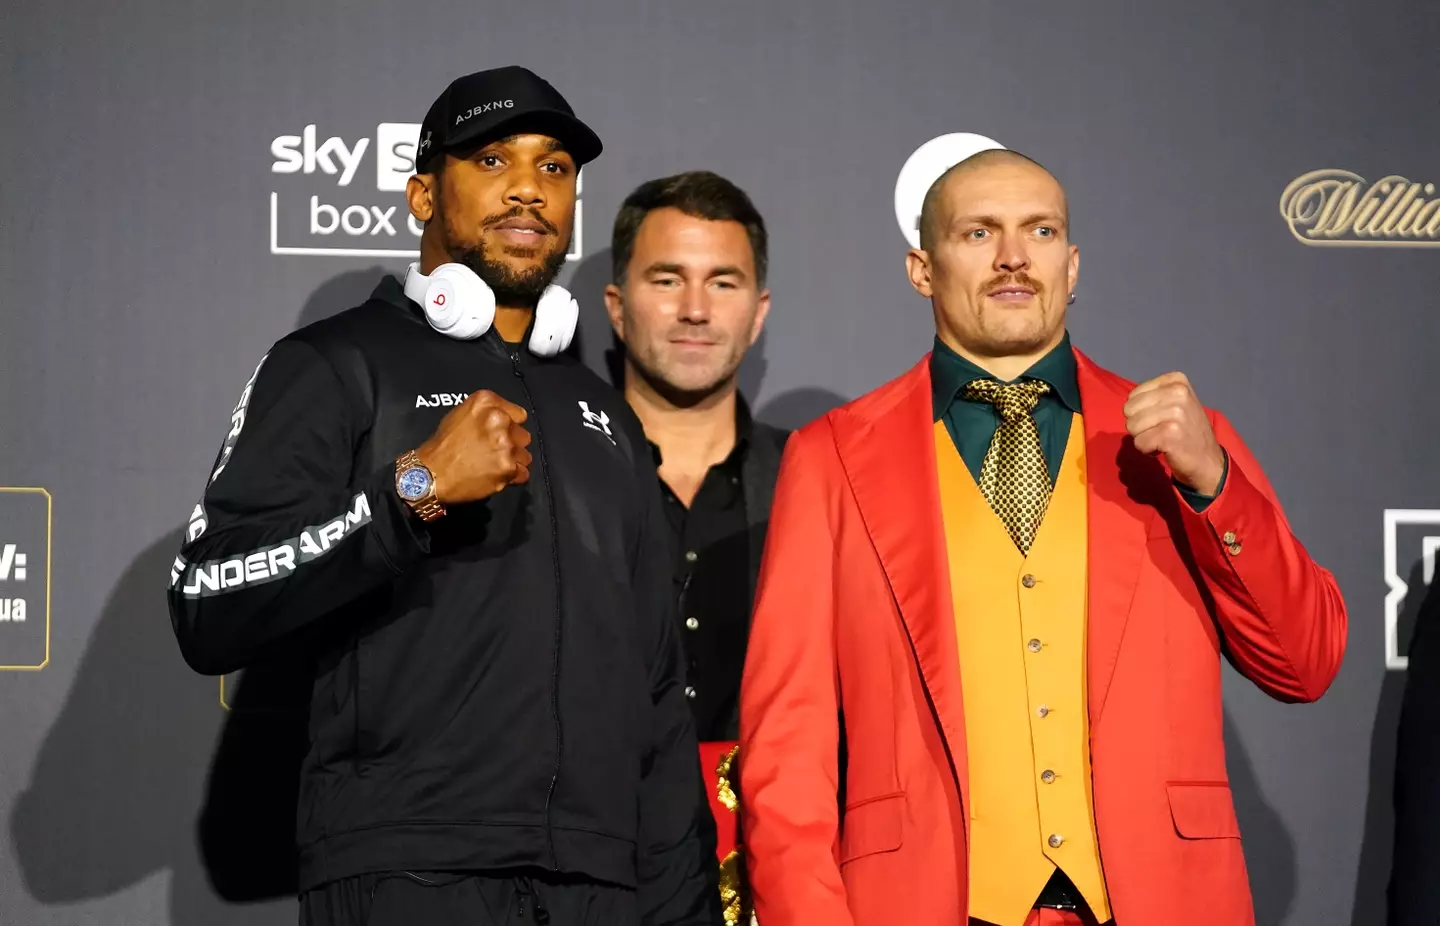 Joshua puts four heavyweight belts on the line